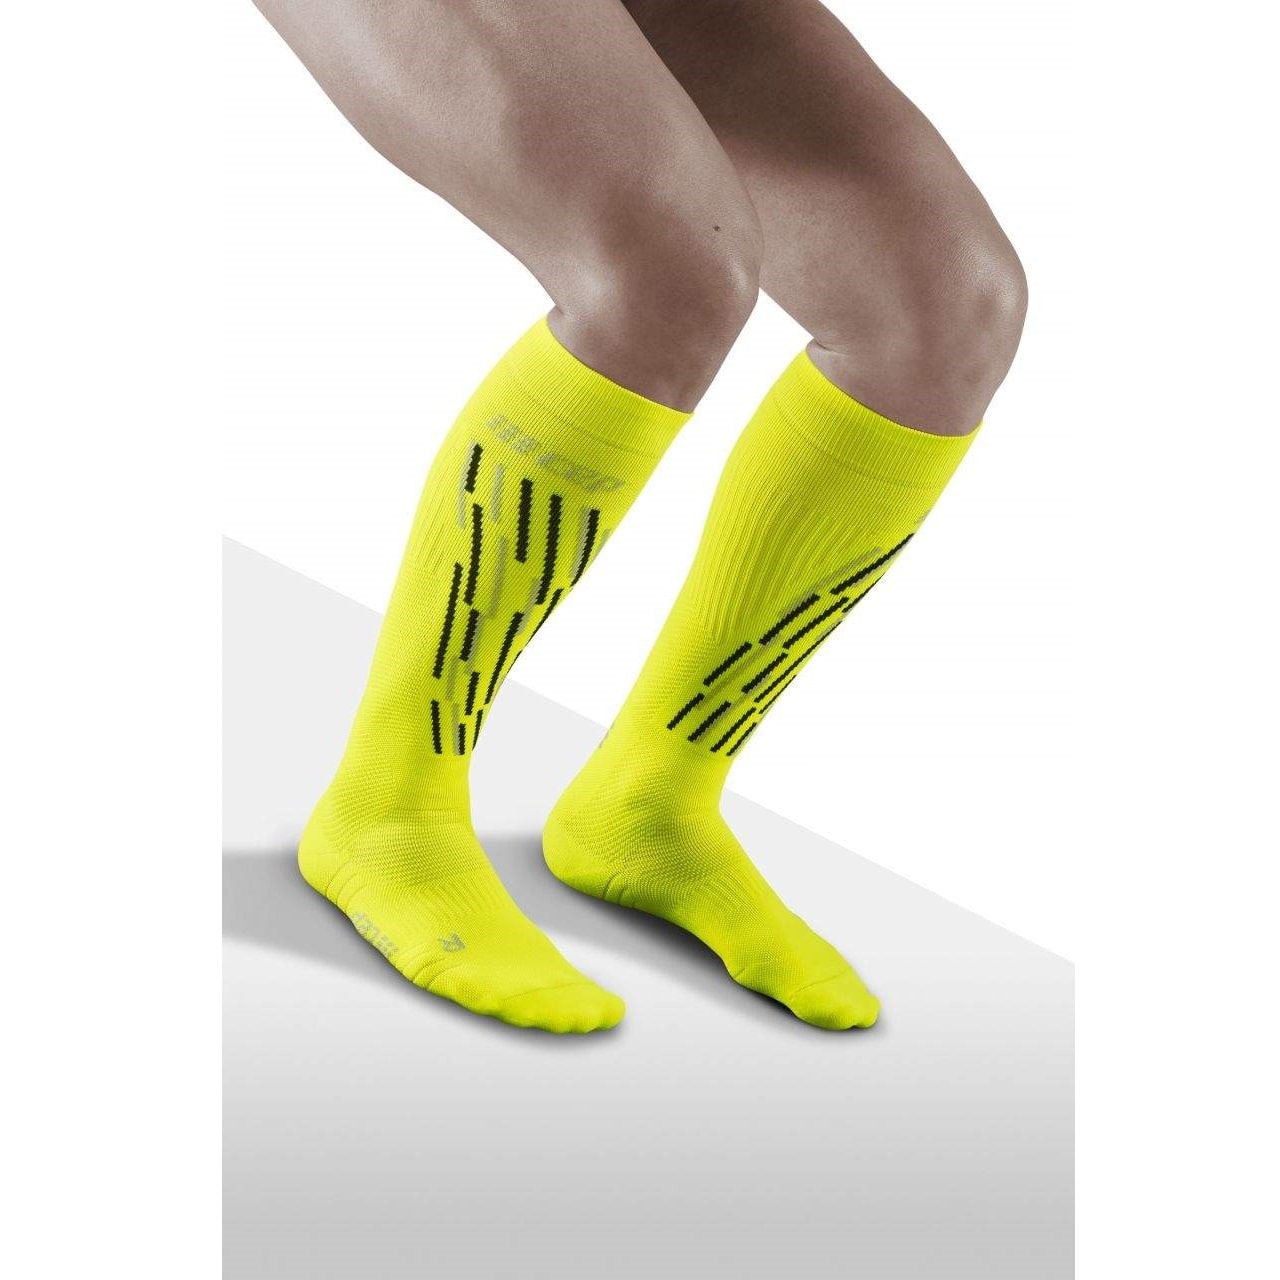 Buy Compression Stockings, Compression Socks & Wrap Arounds